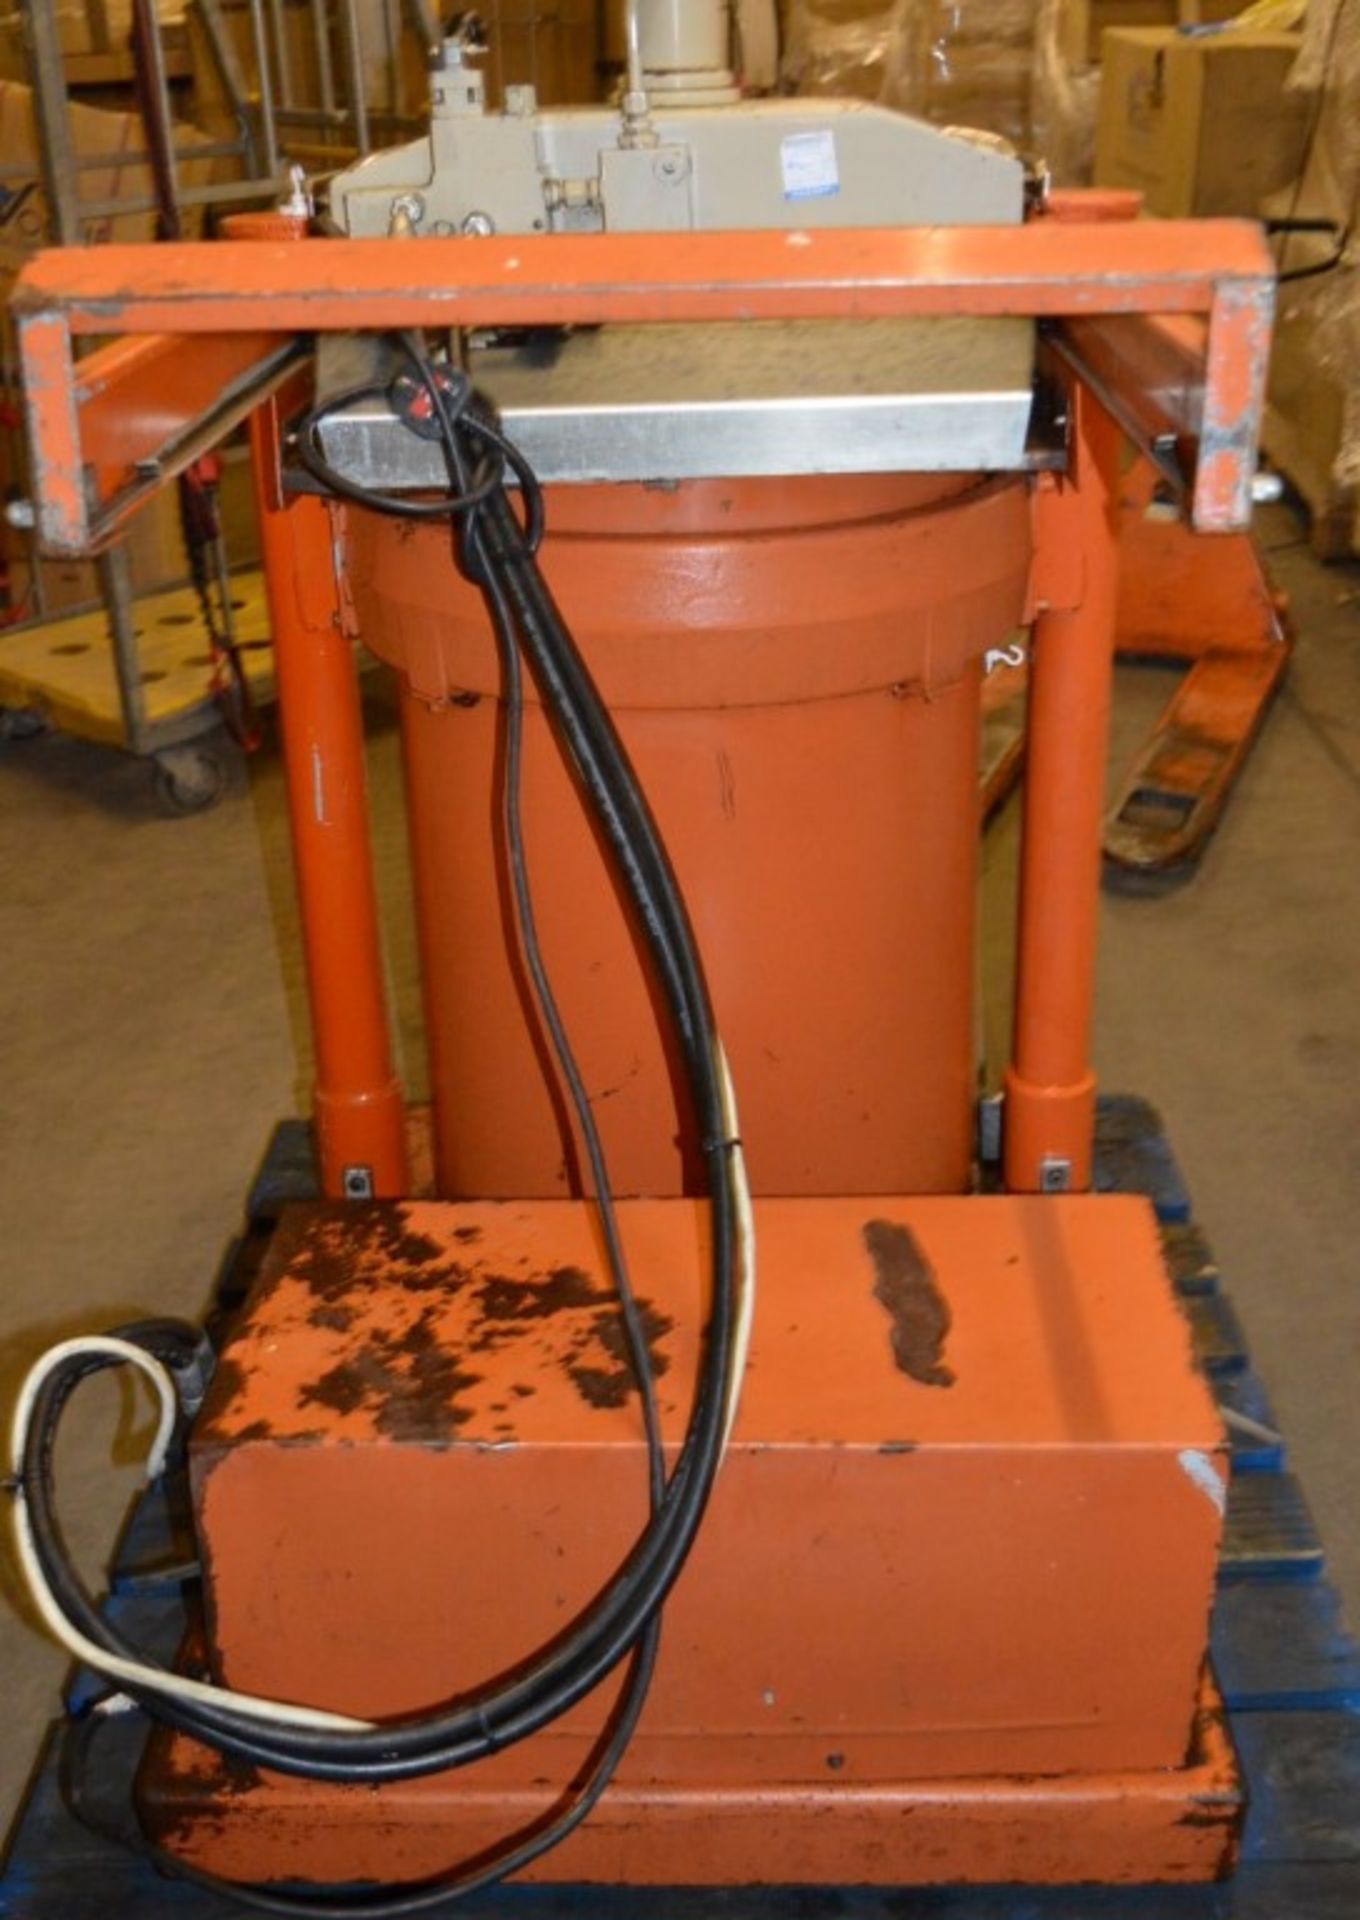 1 x Orwak 5030 Waste Compactor Bailer - Used For Compacting Recyclable or Non-Recyclable Waste - - Image 2 of 4